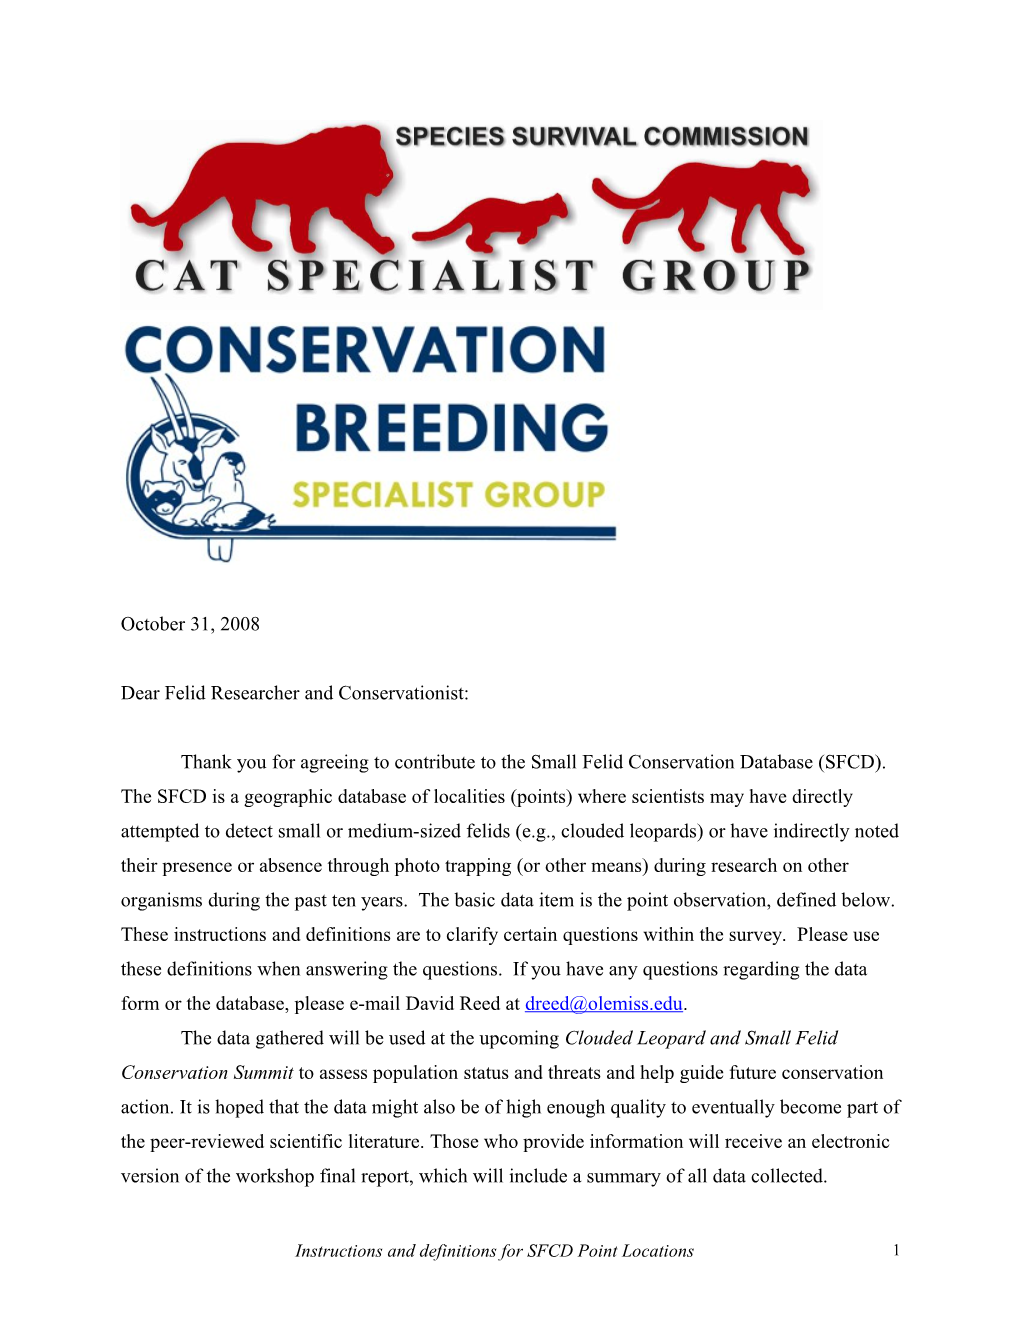 Dear Felid Researcher and Conservationist